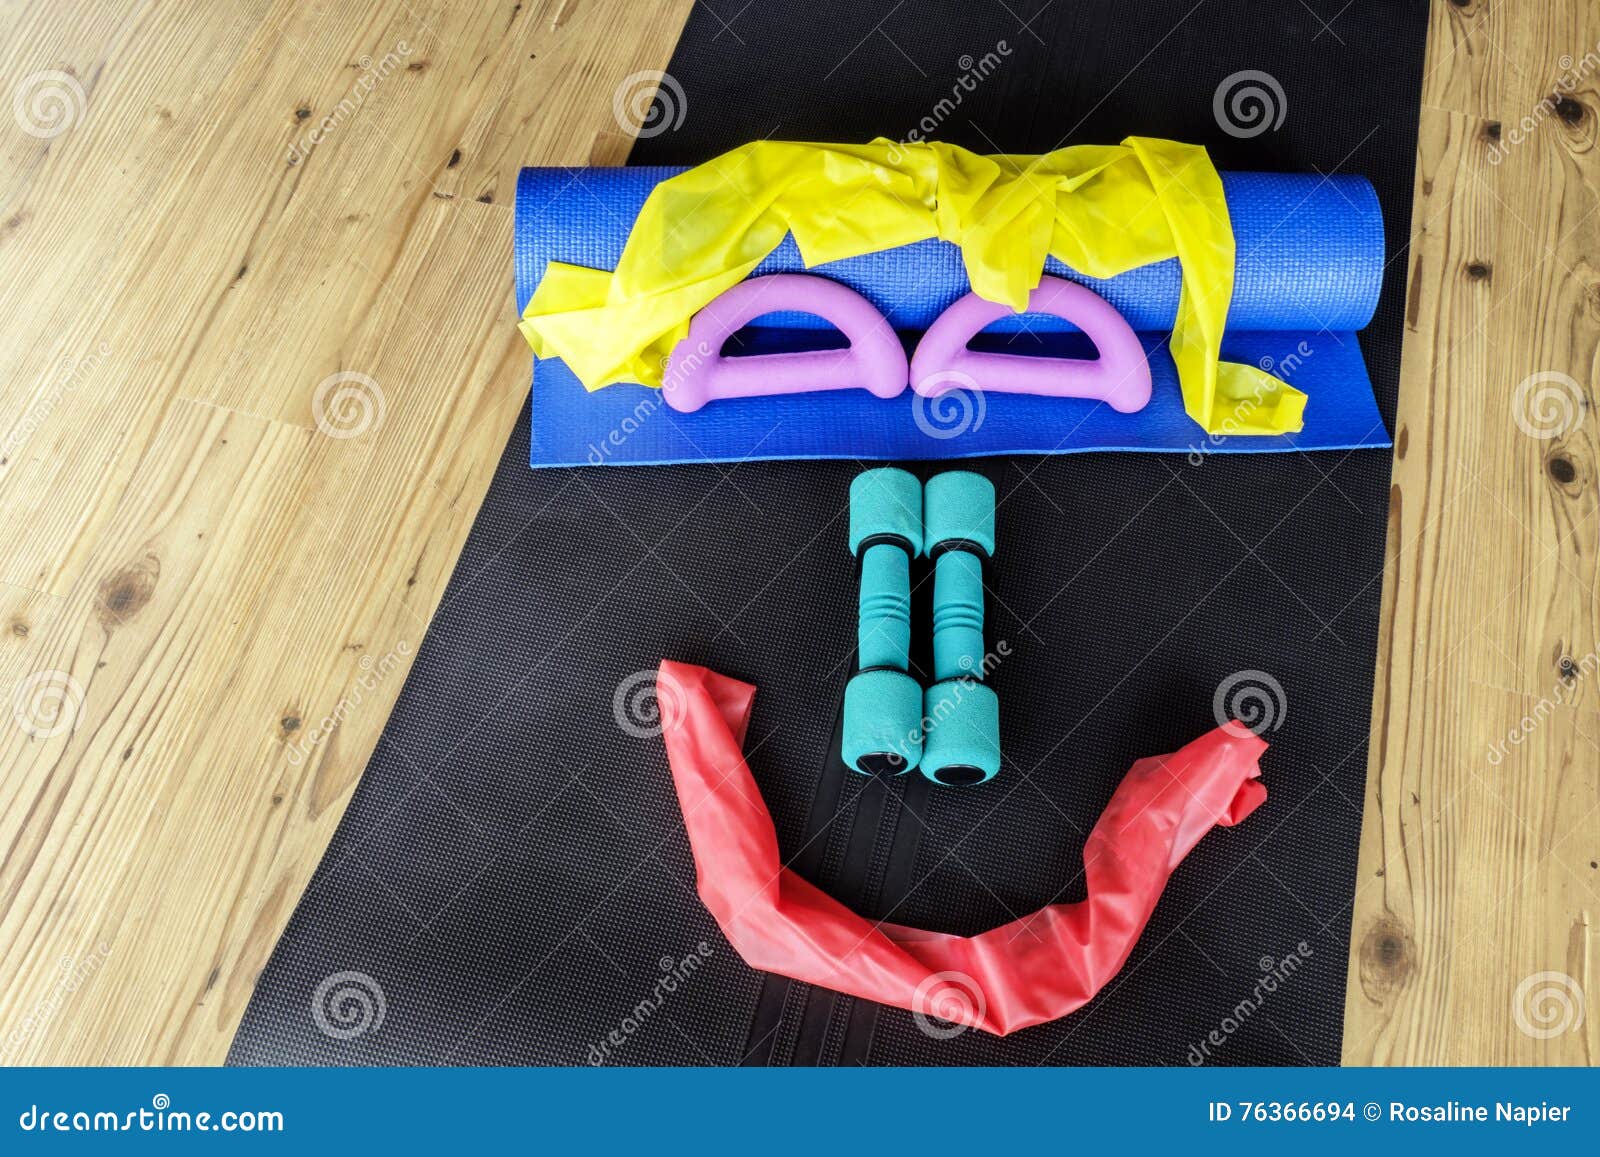 Home Gym Equipment Smiley Face Stock Photo - Image of equipment, hand ...